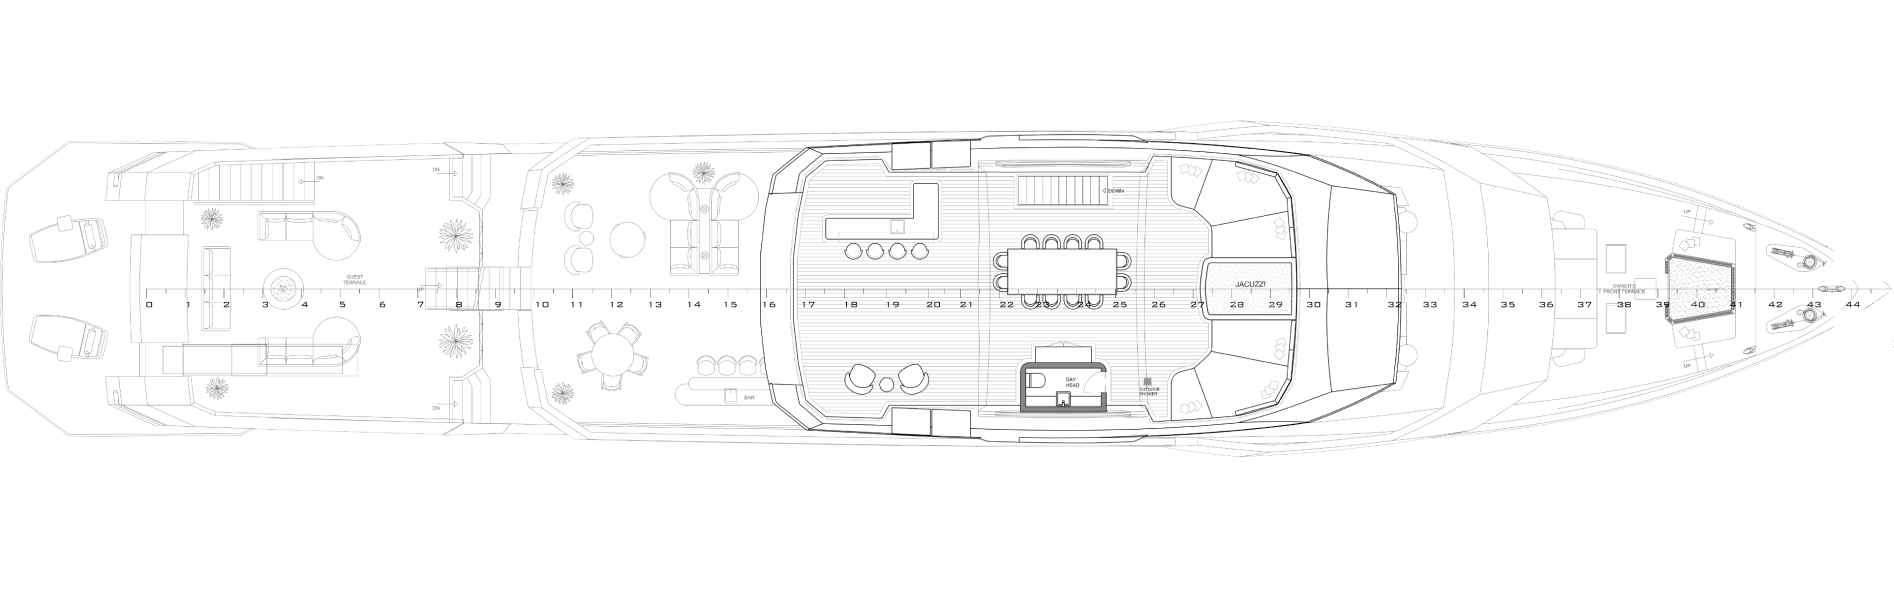 Ares Yachts Atlas Midledeck